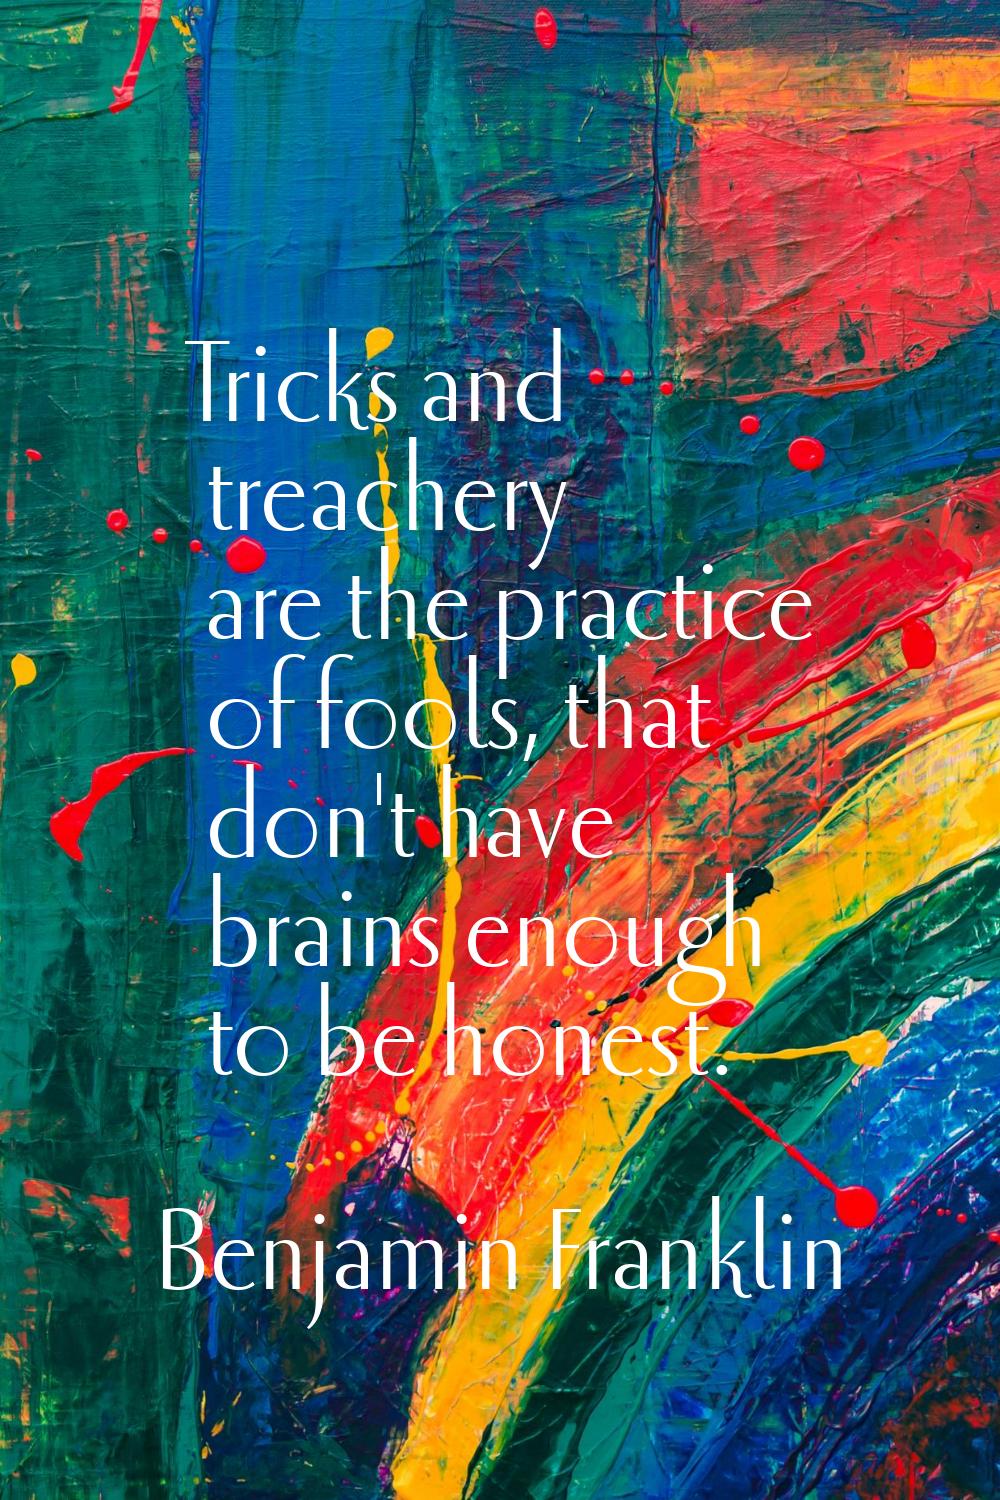 Tricks and treachery are the practice of fools, that don't have brains enough to be honest.